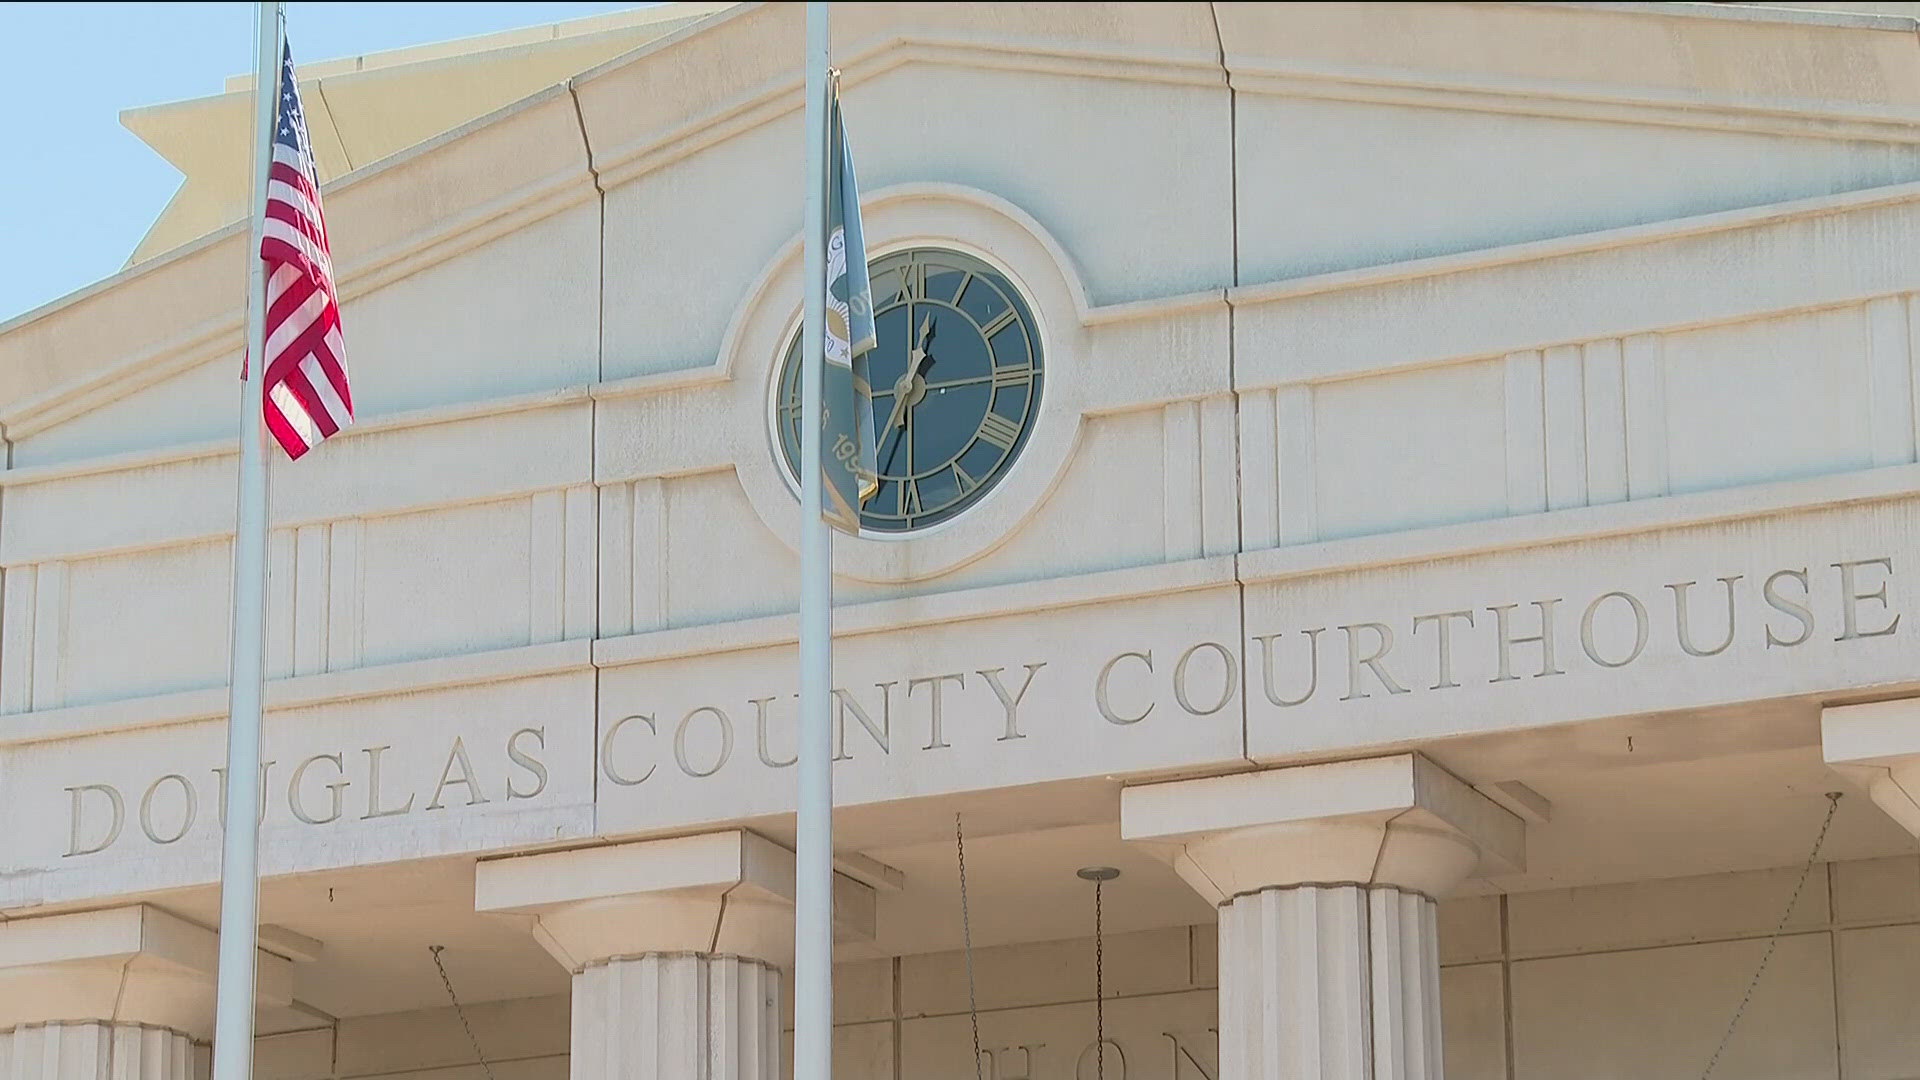 A Douglas County judge has been removed from her position over a variety of ethic and conduct concerns, unrelated to her recent arrest.